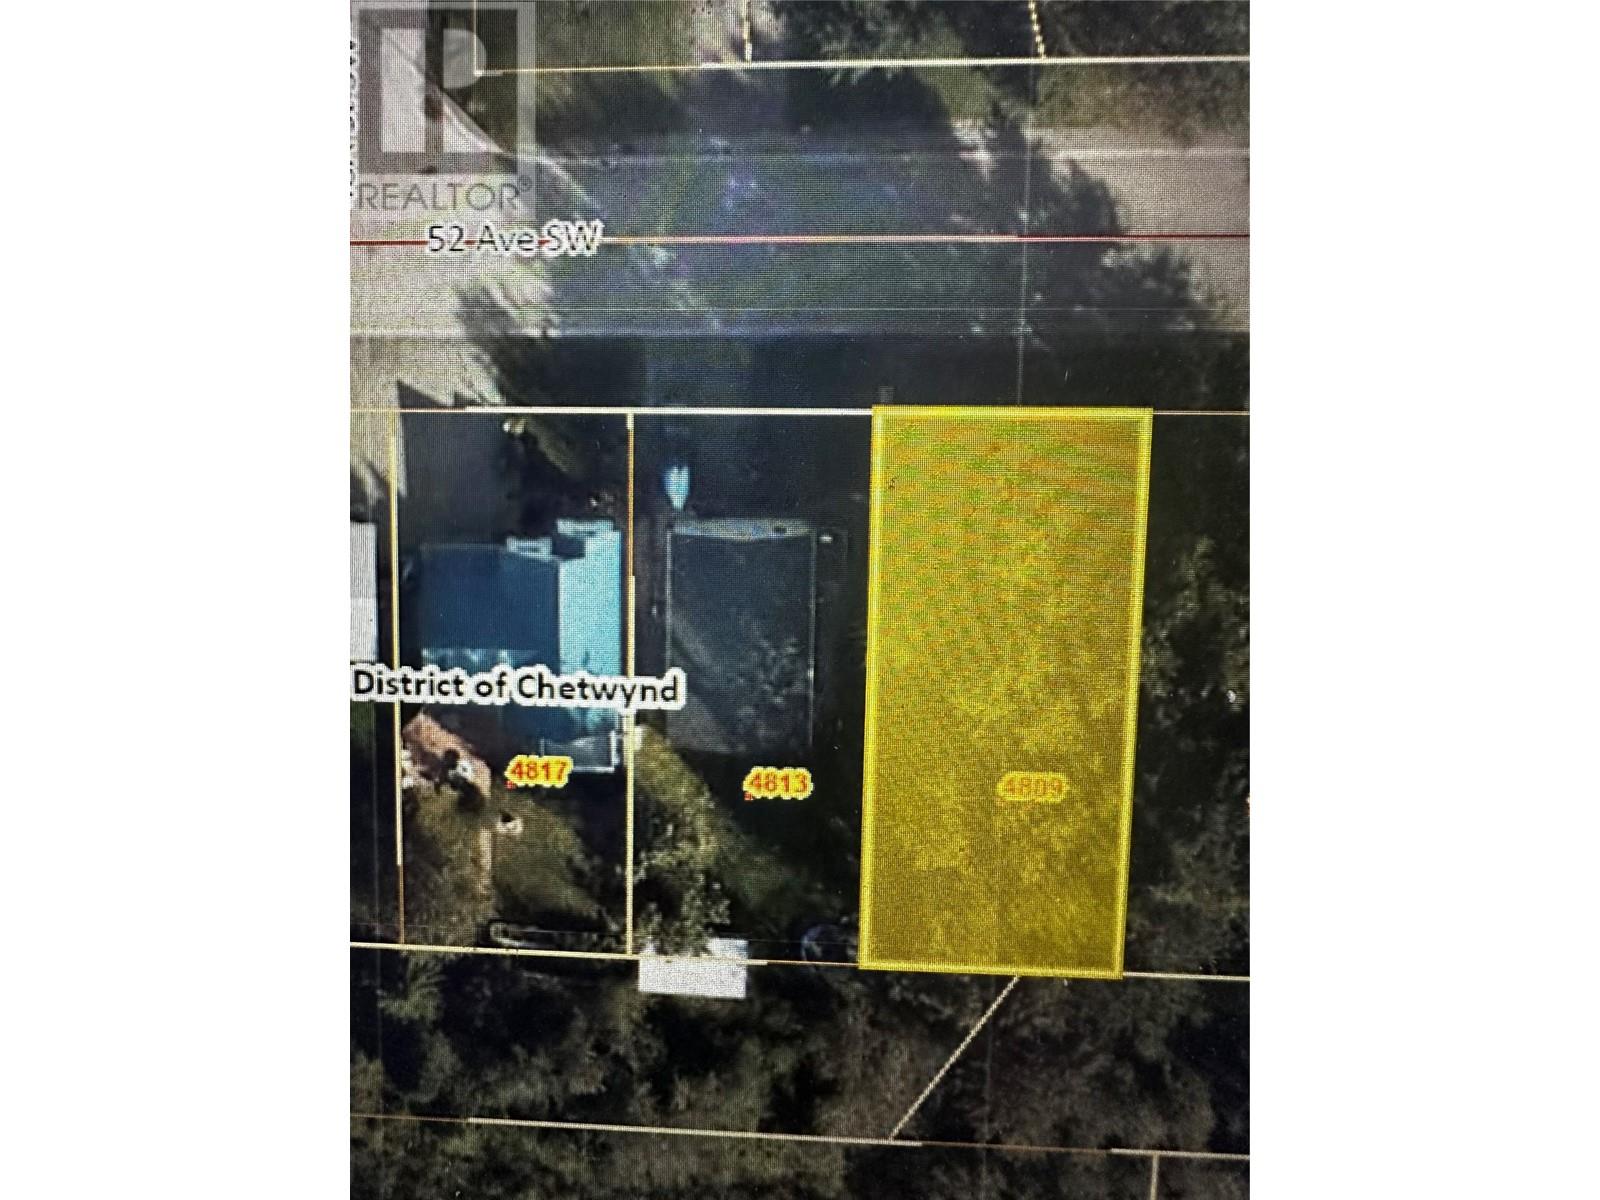 Vacant Land For Sale | 4805 52 Avenue Sw | Chetwynd | V0C1J0